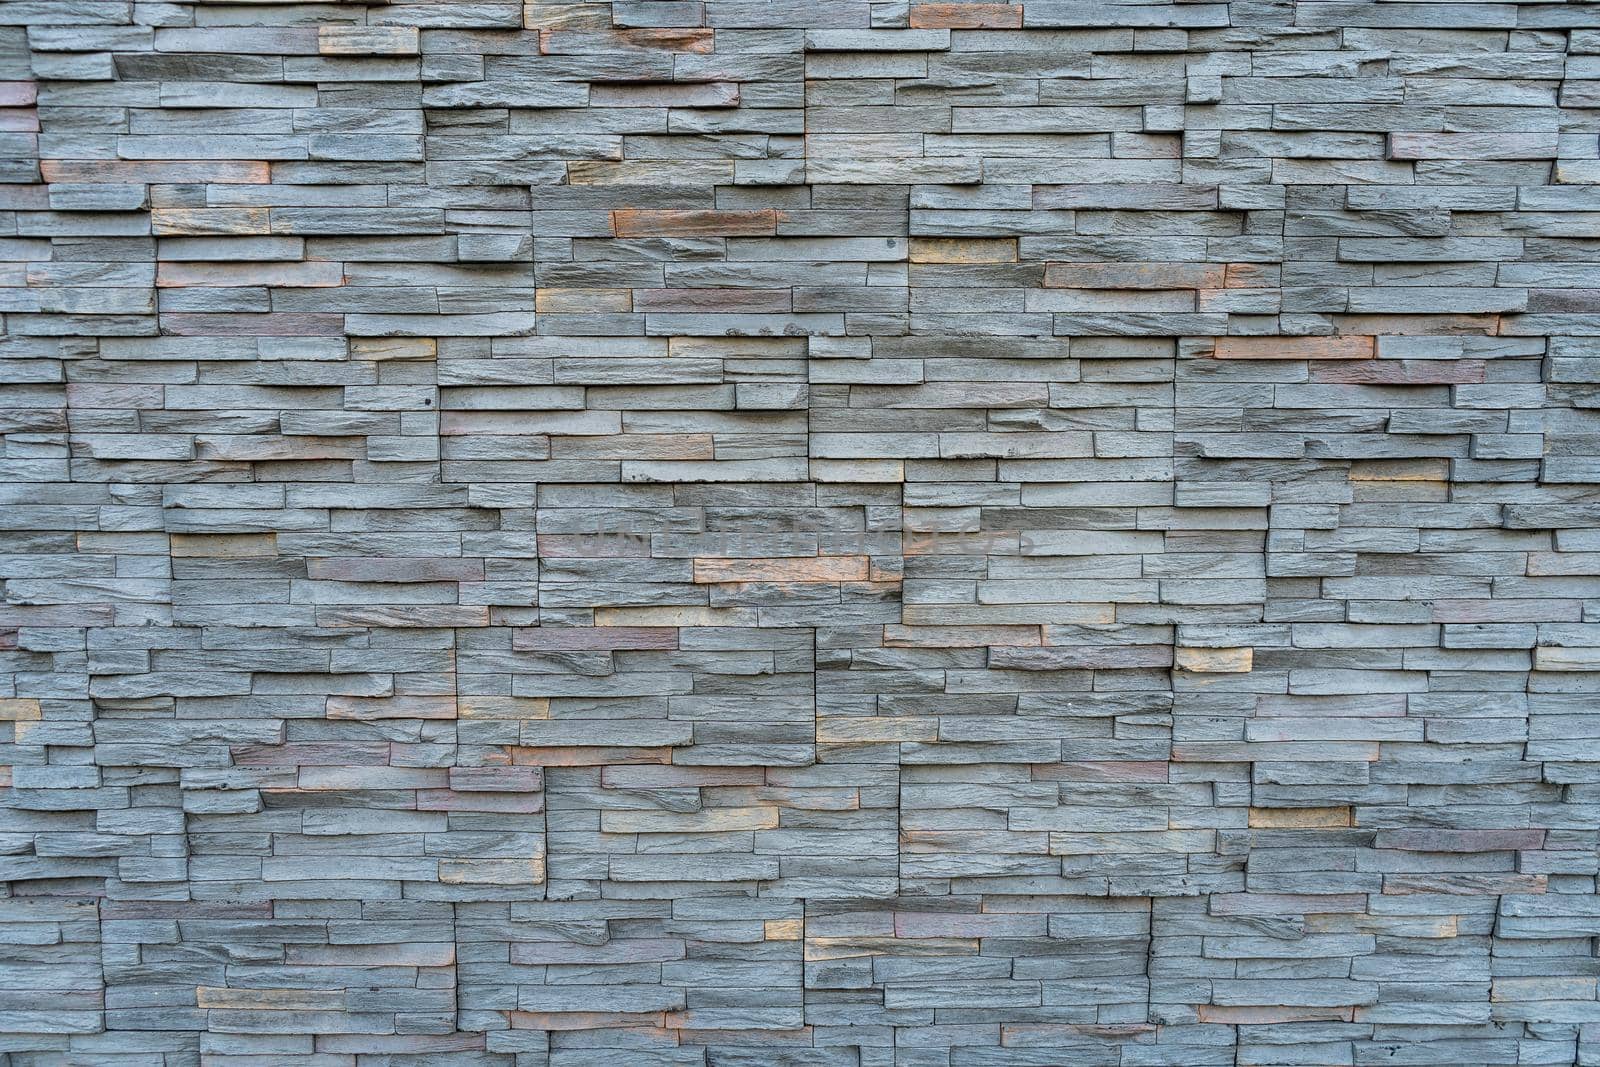 A Background arrangement of stones or slabs of different shapes and colors on a wall.